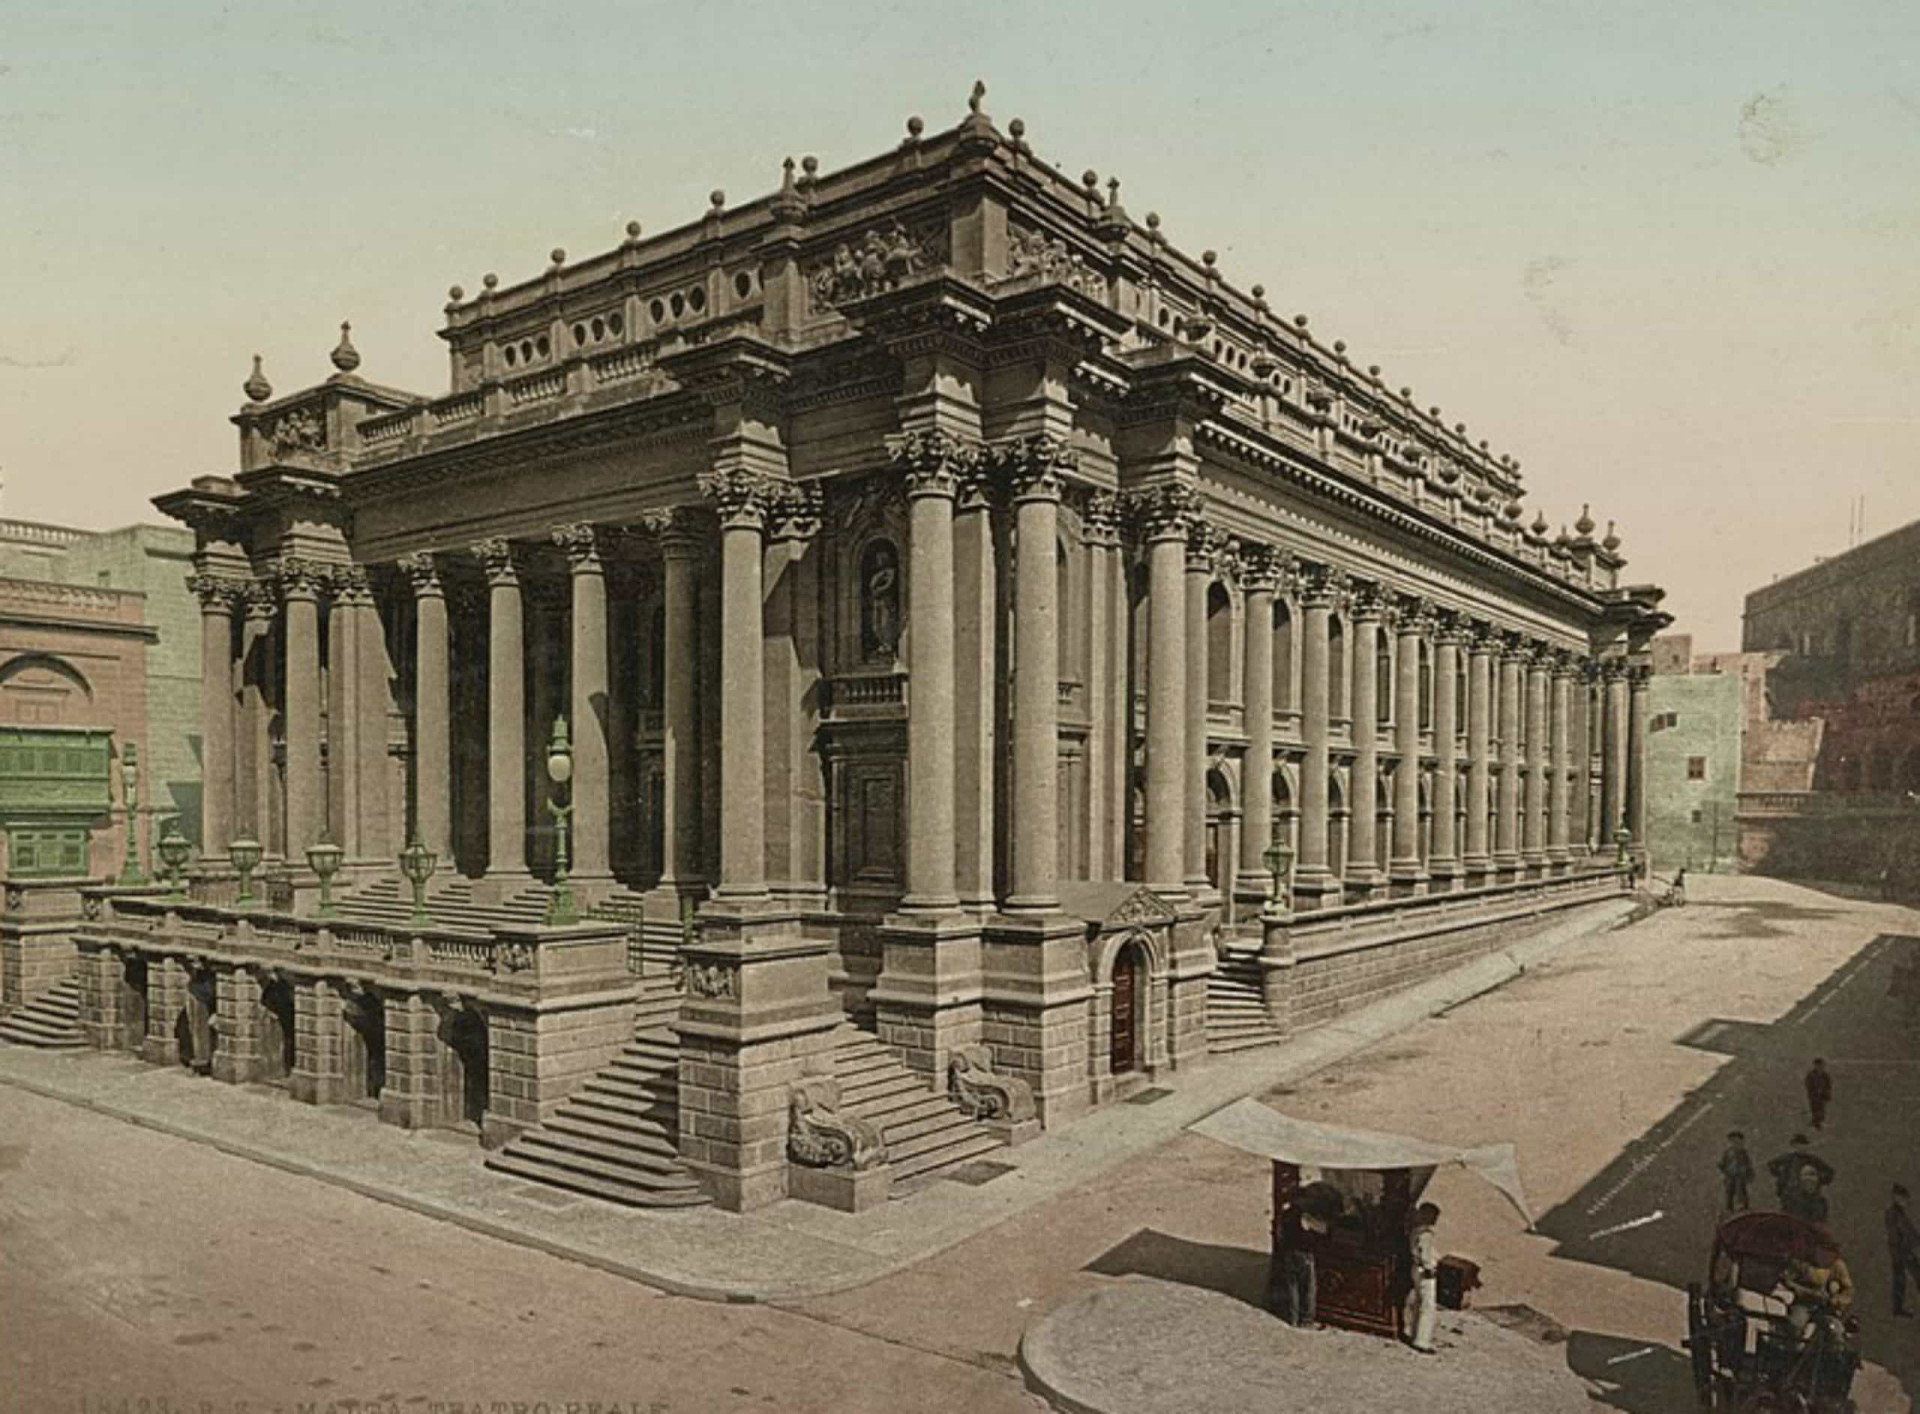 <p>Opened in 1866, the Royal Opera House of Valletta was one of the finest buildings in the city. In 1873, a fire gutted the interior. Then during WWII, it suffered a direct hit from aerial bombing. Today, only a few columns remain standing.</p><p><a href="https://www.msn.com/en-my/community/channel/vid-7xx8mnucu55yw63we9va2gwr7uihbxwc68fxqp25x6tg4ftibpra?cvid=94631541bc0f4f89bfd59158d696ad7e">Follow us and access great exclusive content every day</a></p>